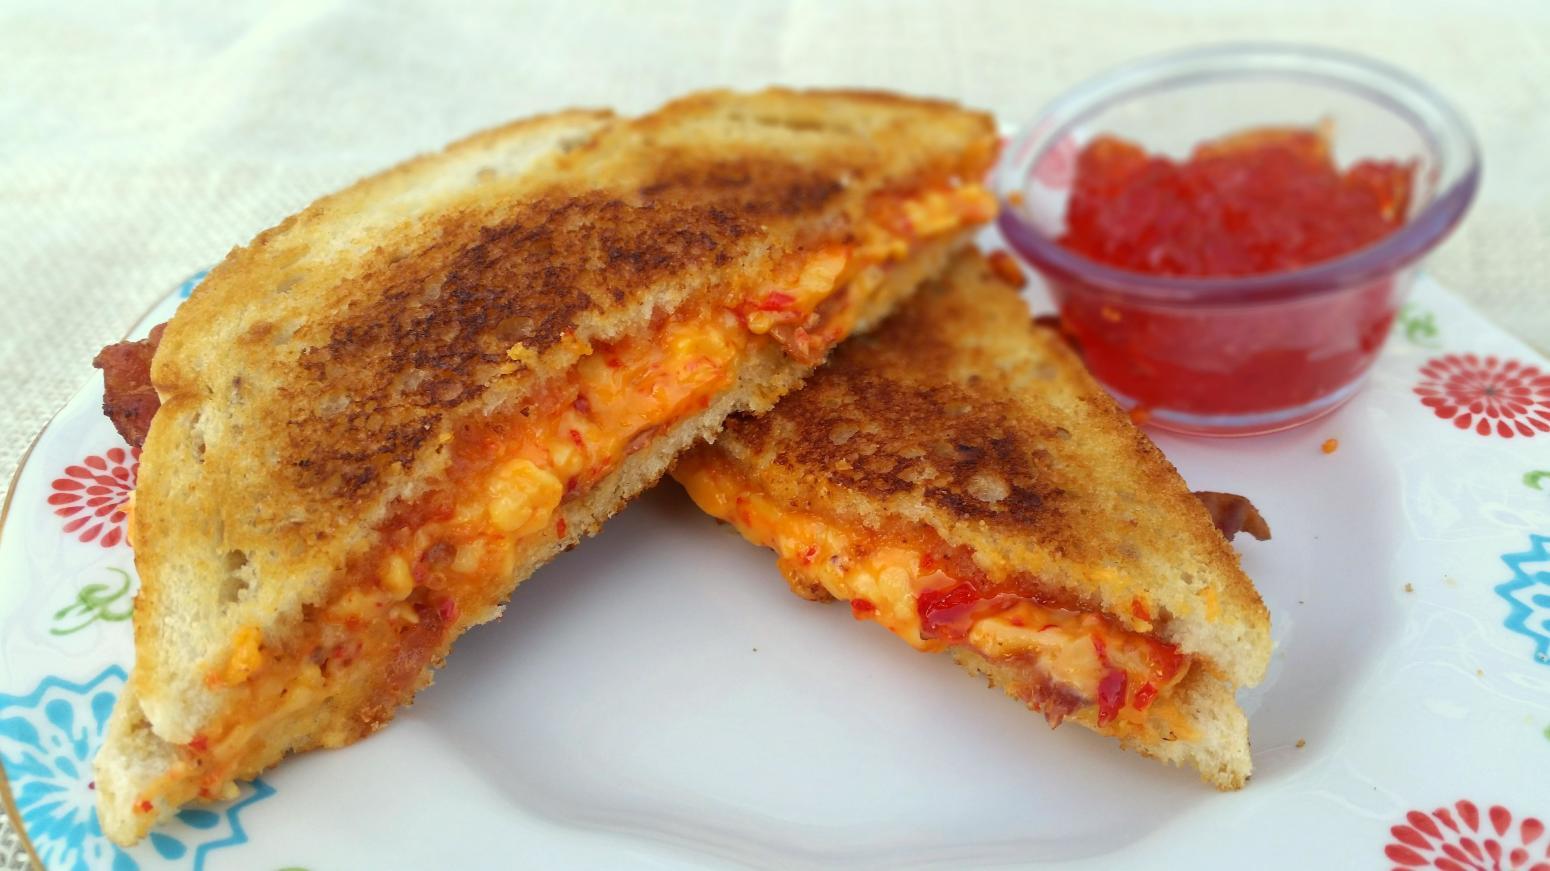 Grilled Pimento Cheese & Bacon with Pepper Jelly